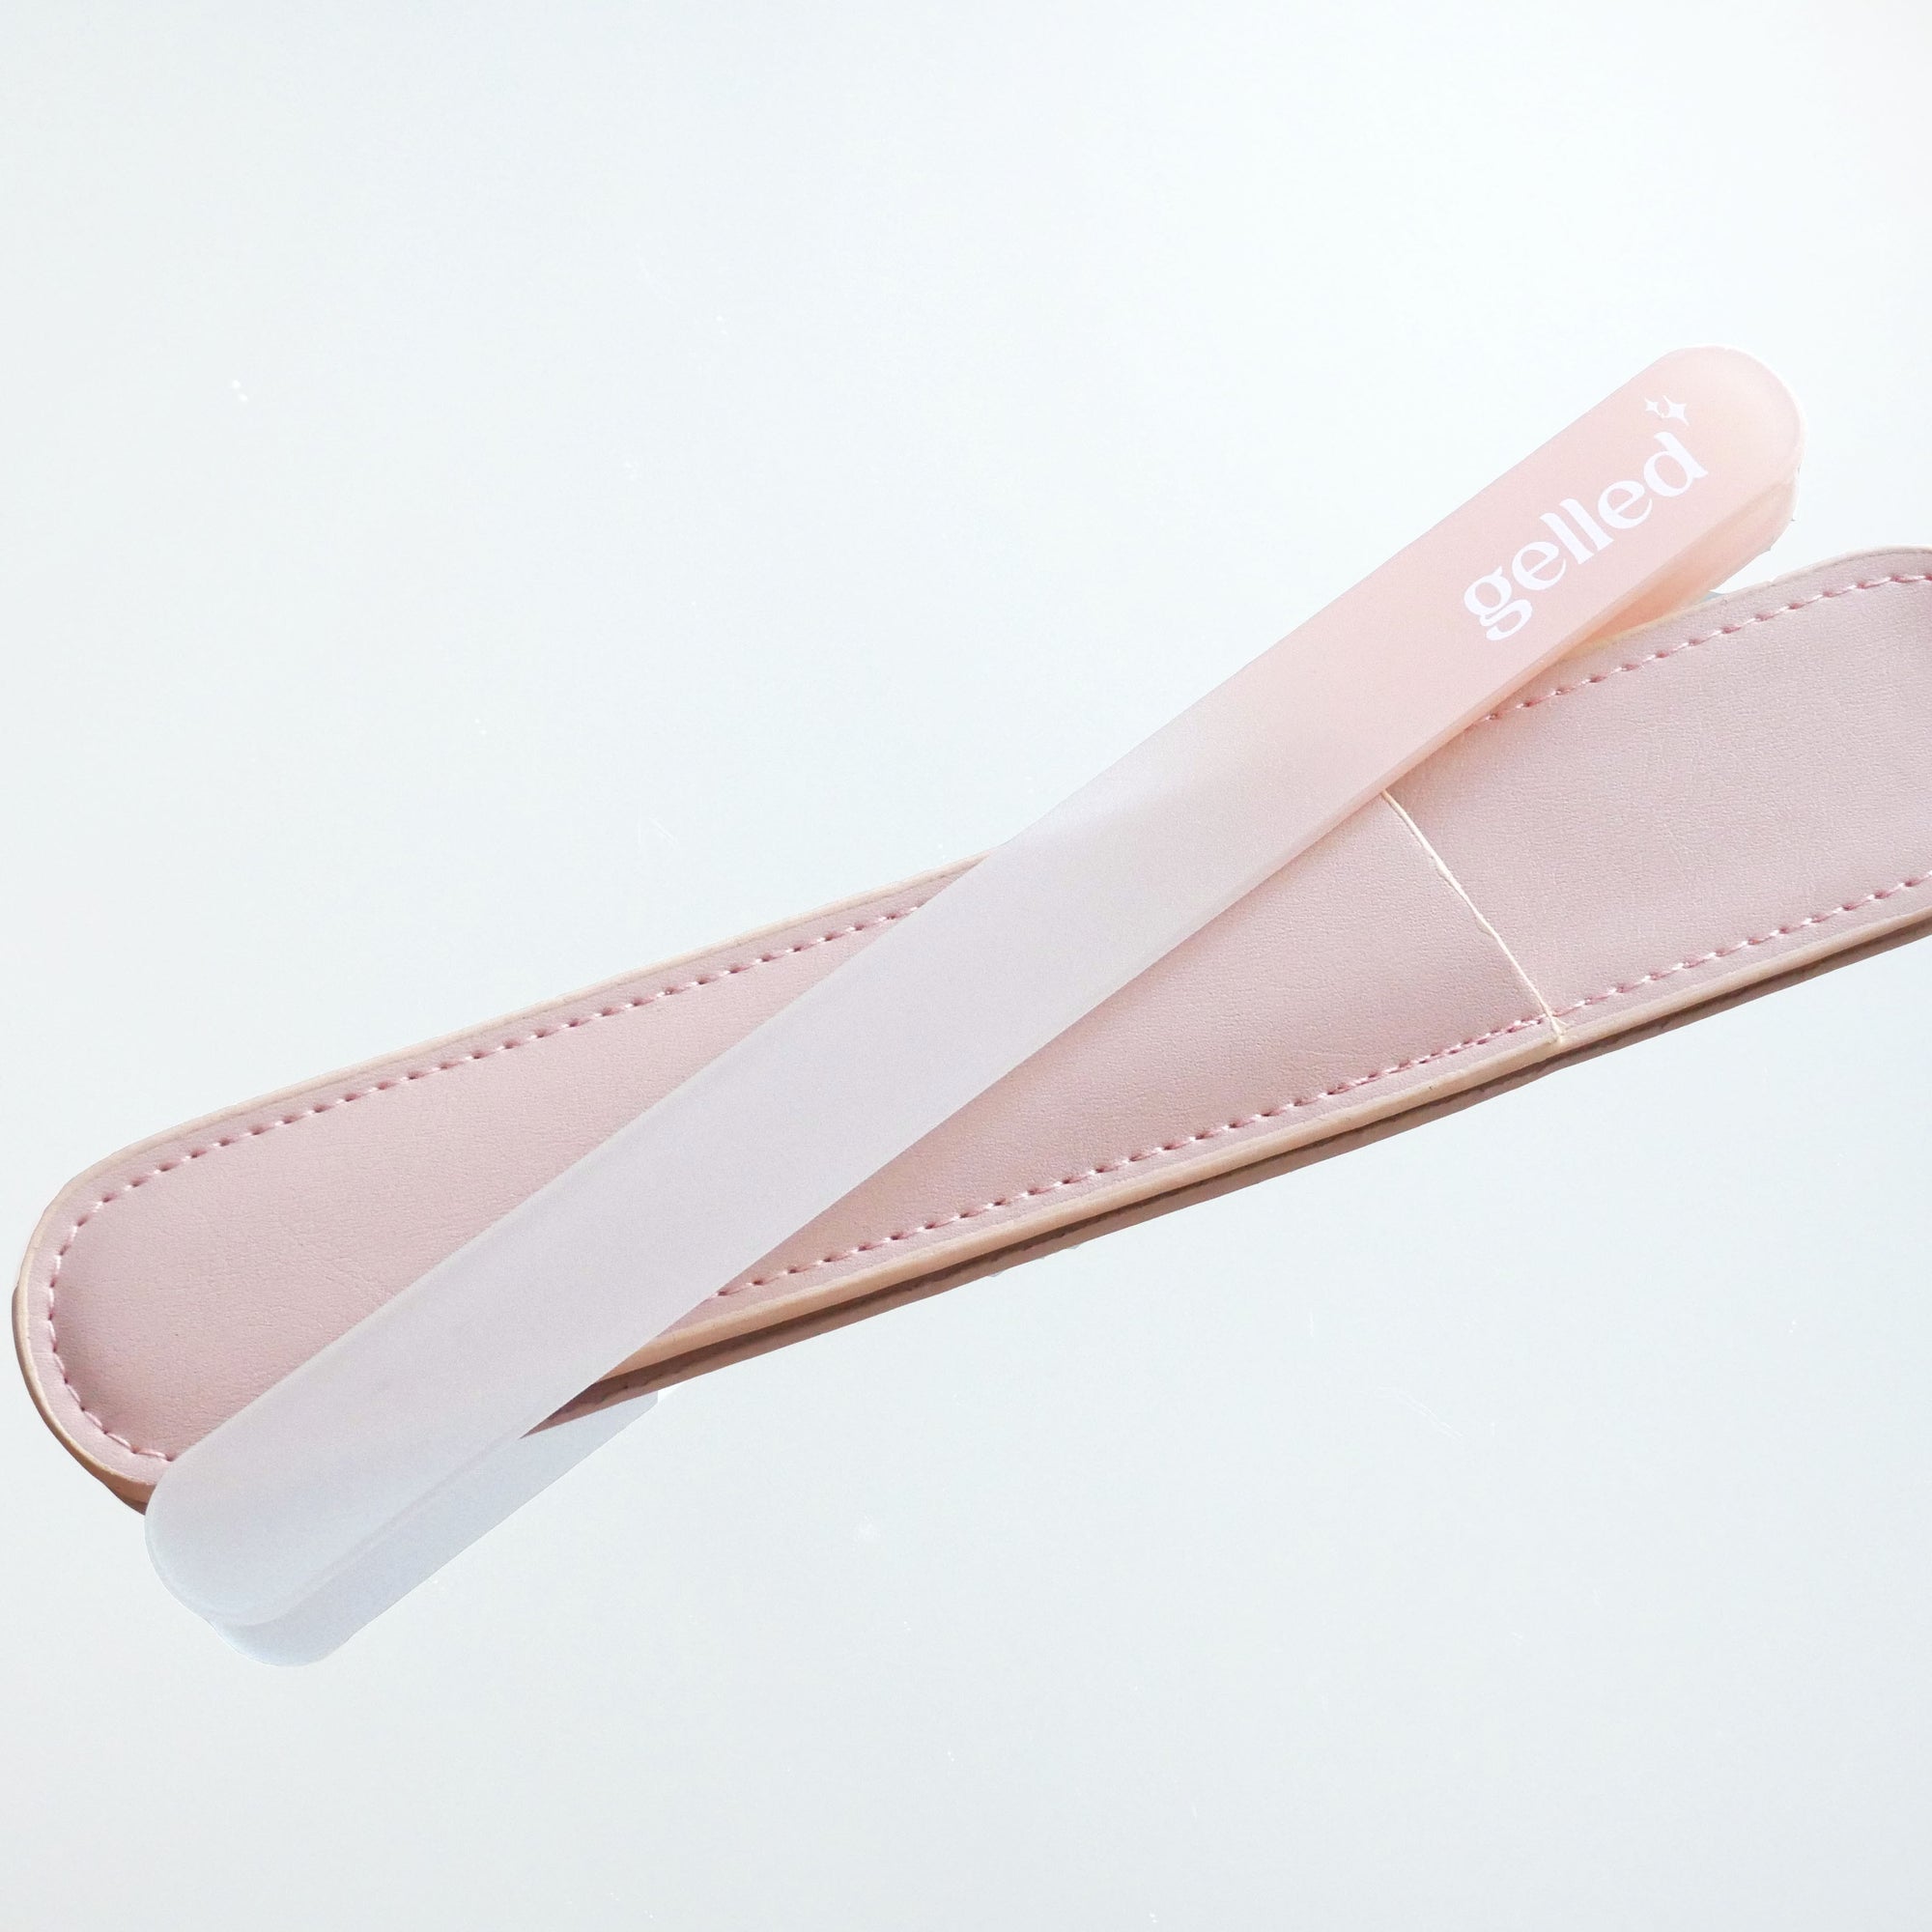 The Gelled Crystal Nail File